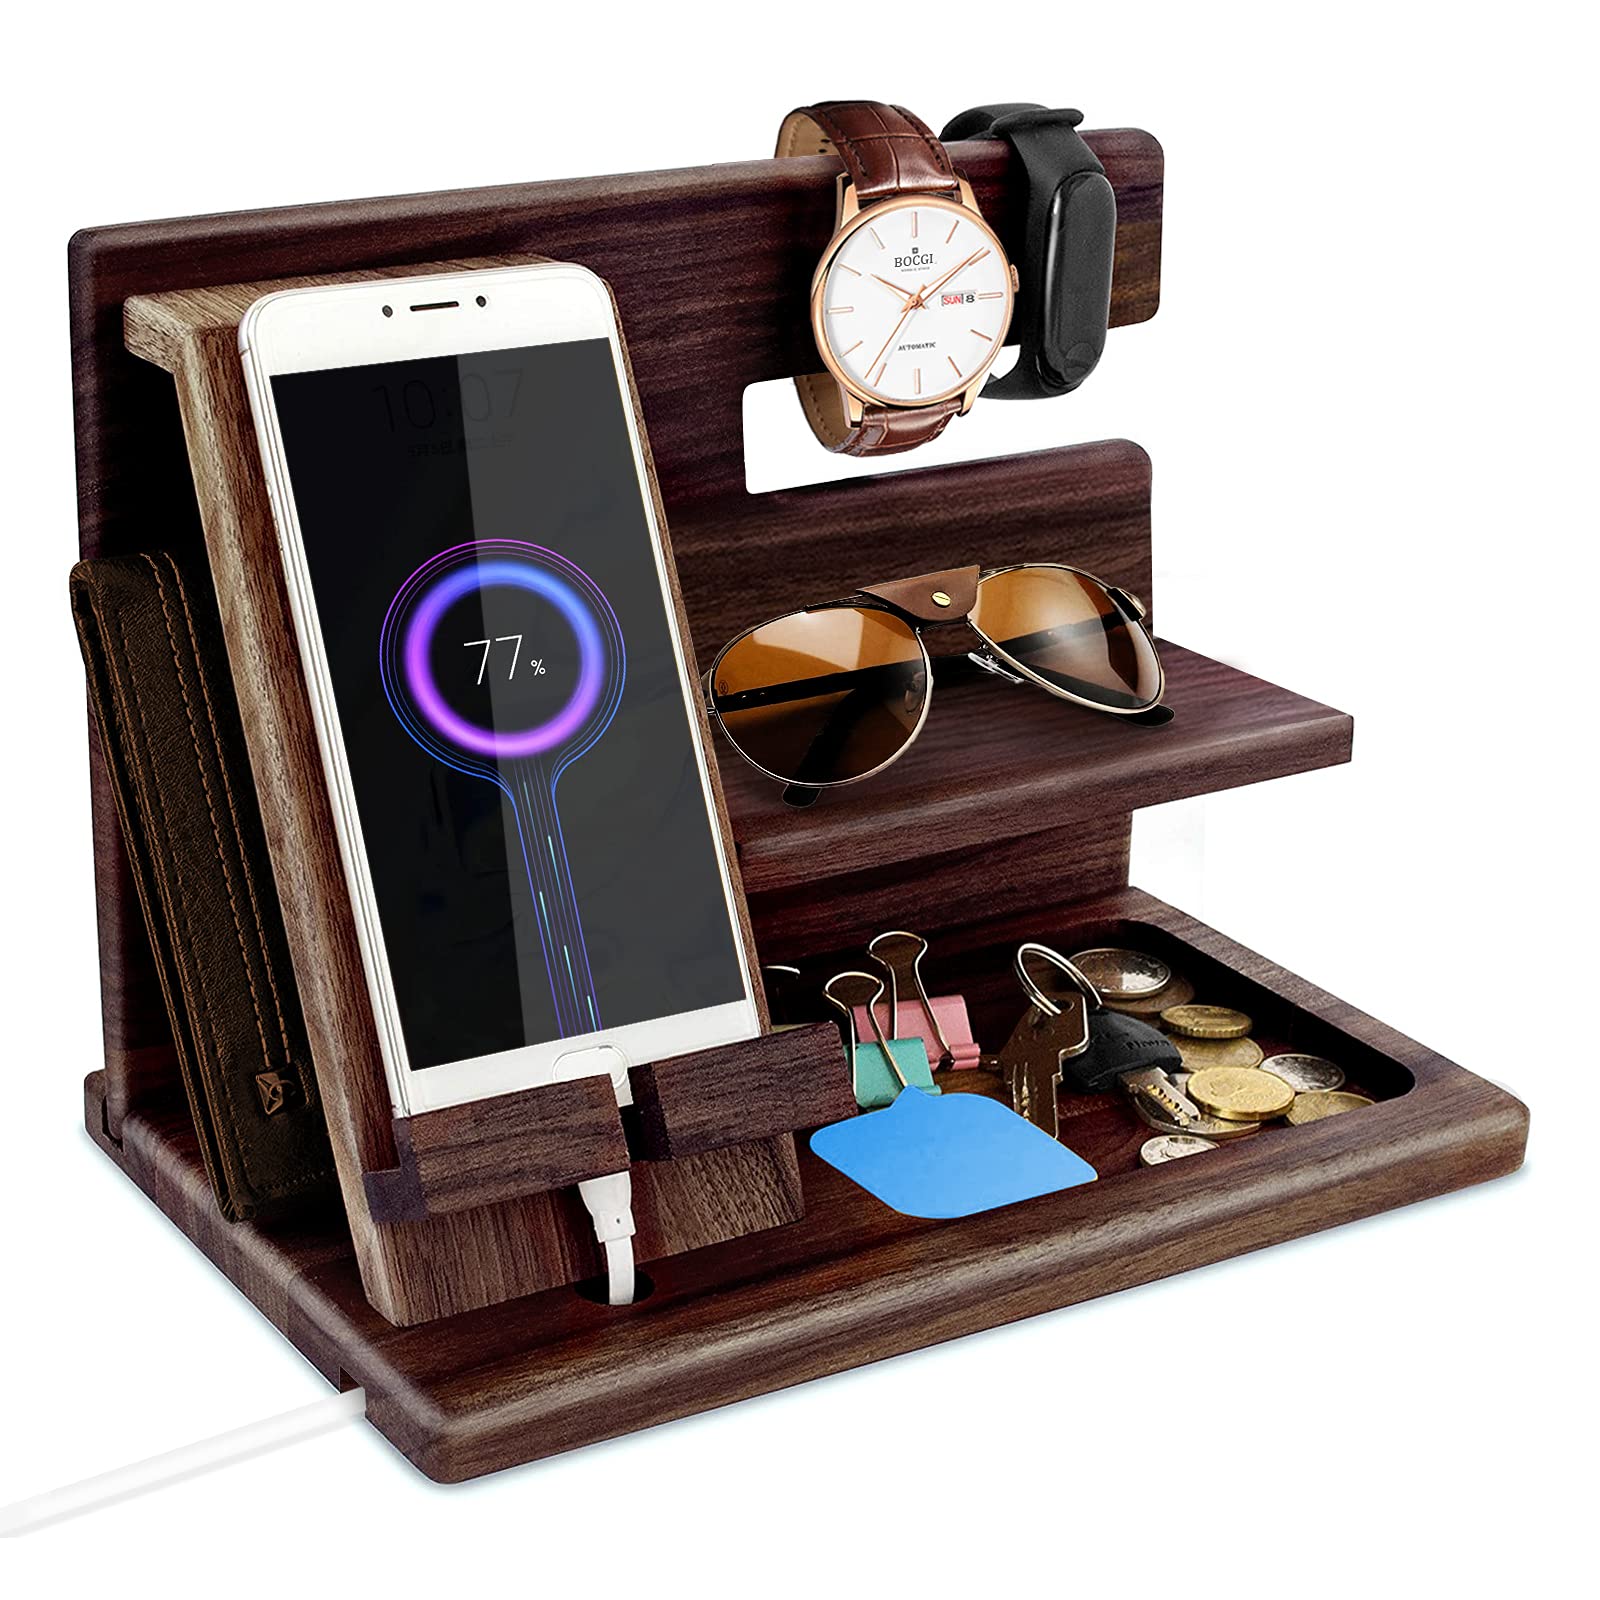 Birthday Gifts for Him Gifts for Men Fathers Day Presents Dad Gifts Mens Bedside Organiser for Him Presents for Men Wooden Docking Station for Men Bedside Gadgets for Dad ​Grandad Gifts Mens Organiser